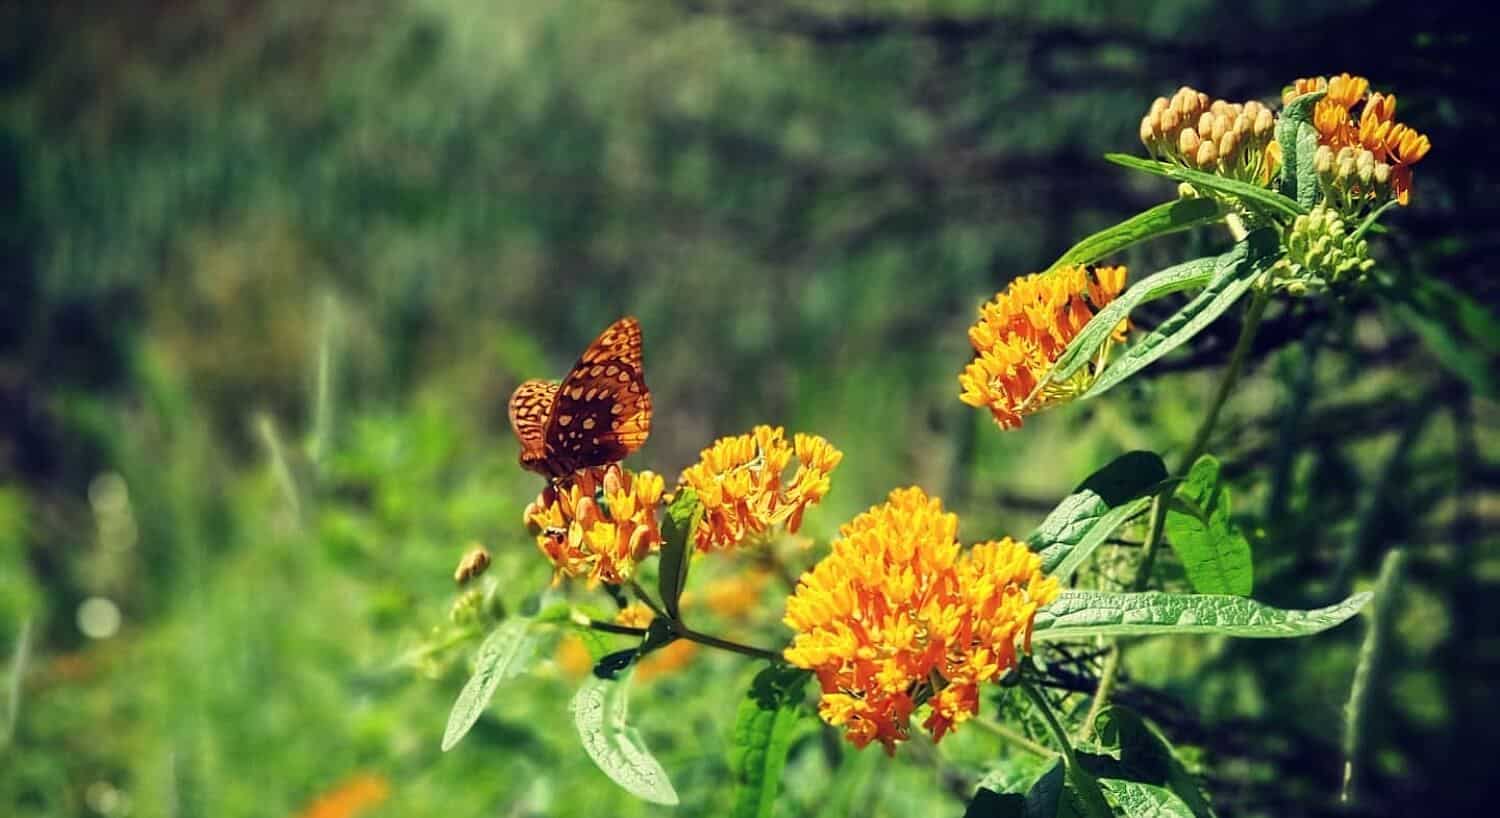 Single butterfly on a group of yellow flowers with blurred green background